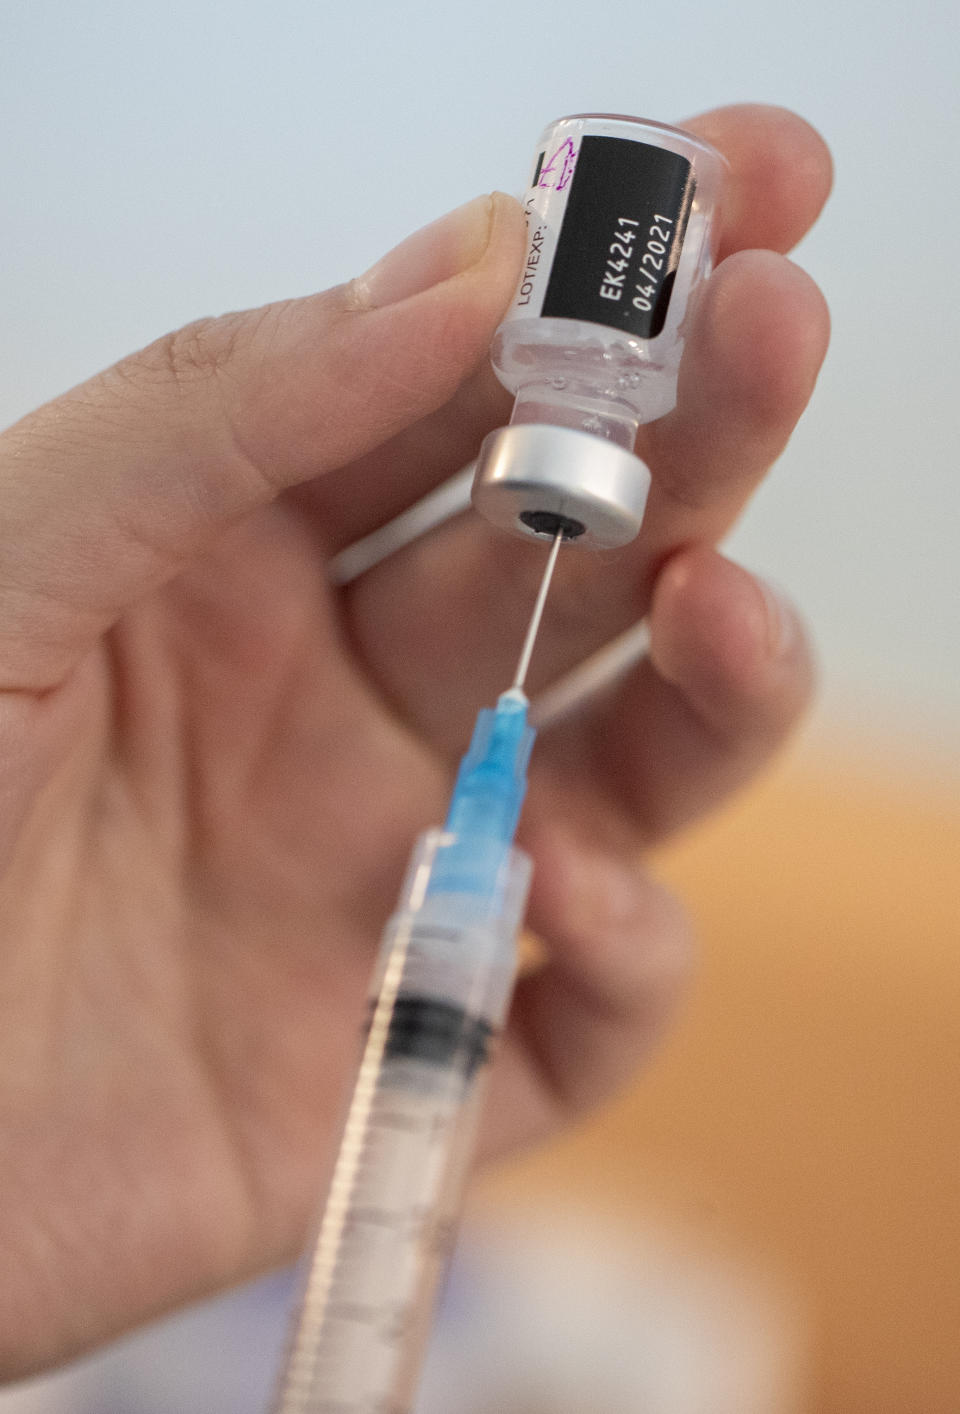 A nurse prepares a COVID-19 vaccine shot for a health worker at the Posta Central Hospital in Santiago, Chile, Thursday, Dec. 24, 2020, on the same day the first shipment of vaccines from Pfizer and its German partner, BioNTech, arrived to Chile. (AP Photo/Esteban Felix)